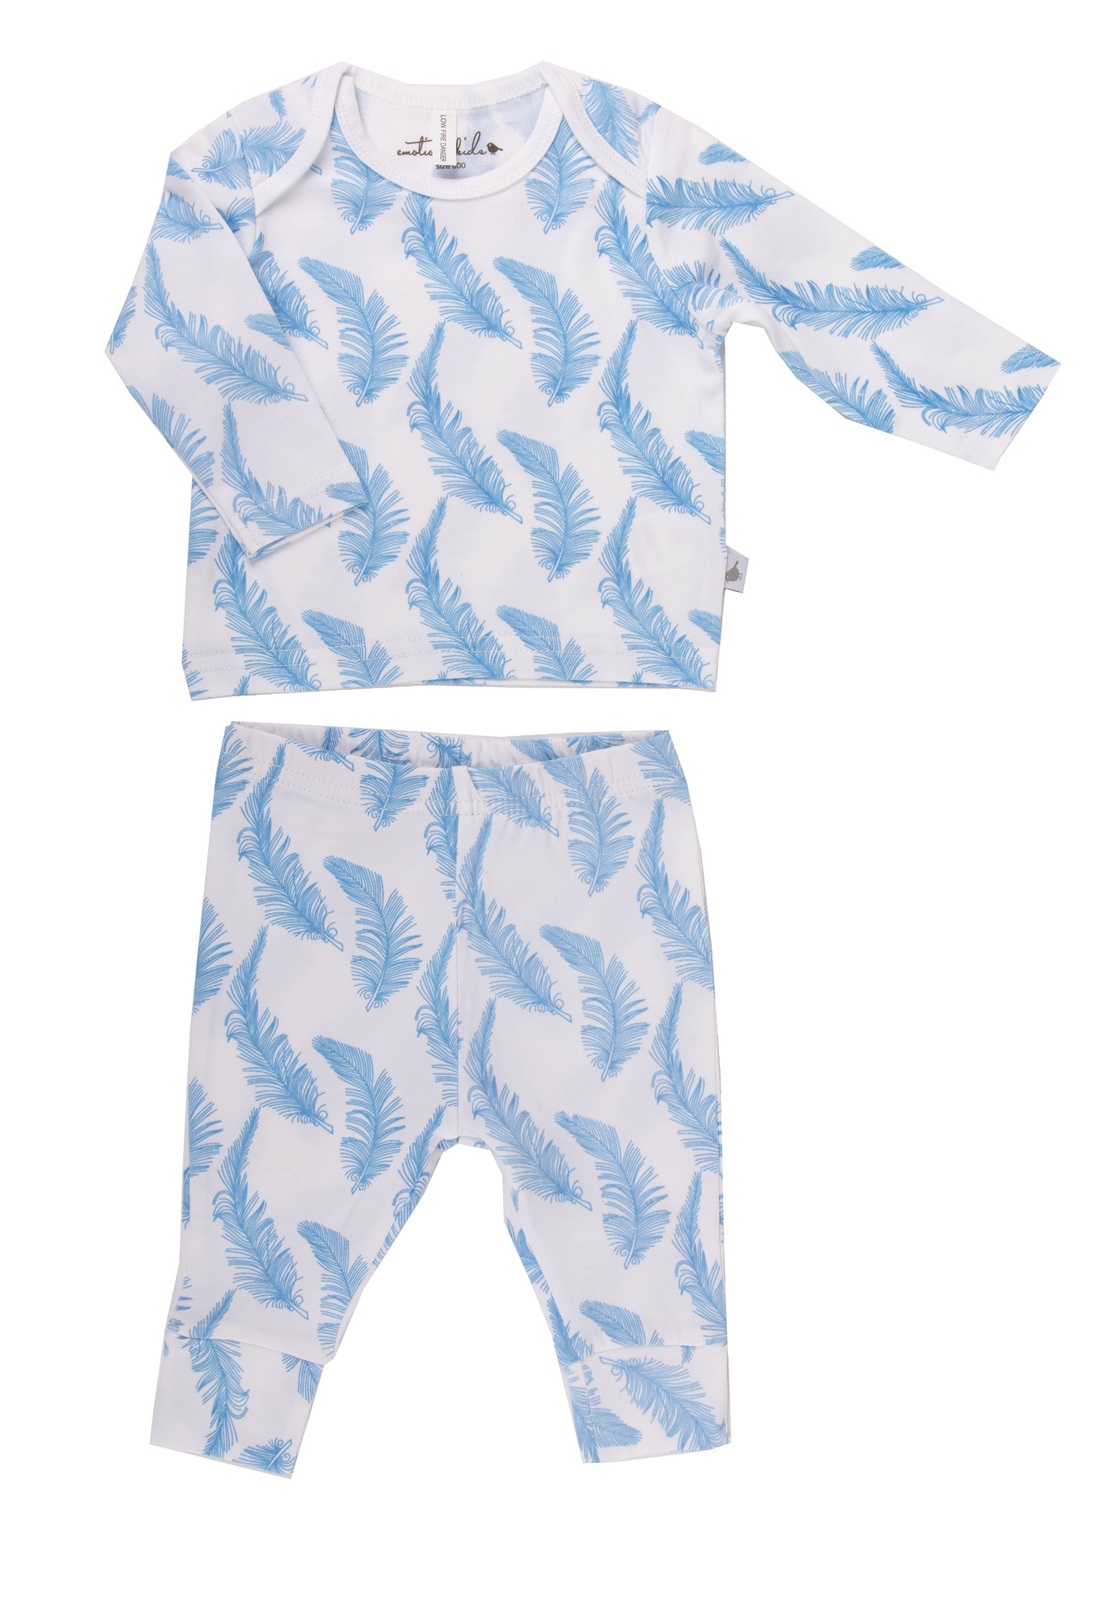 Buy 03 Months Baby Boy Suit Light Blue Baby Sweater Pants Online in India   Etsy